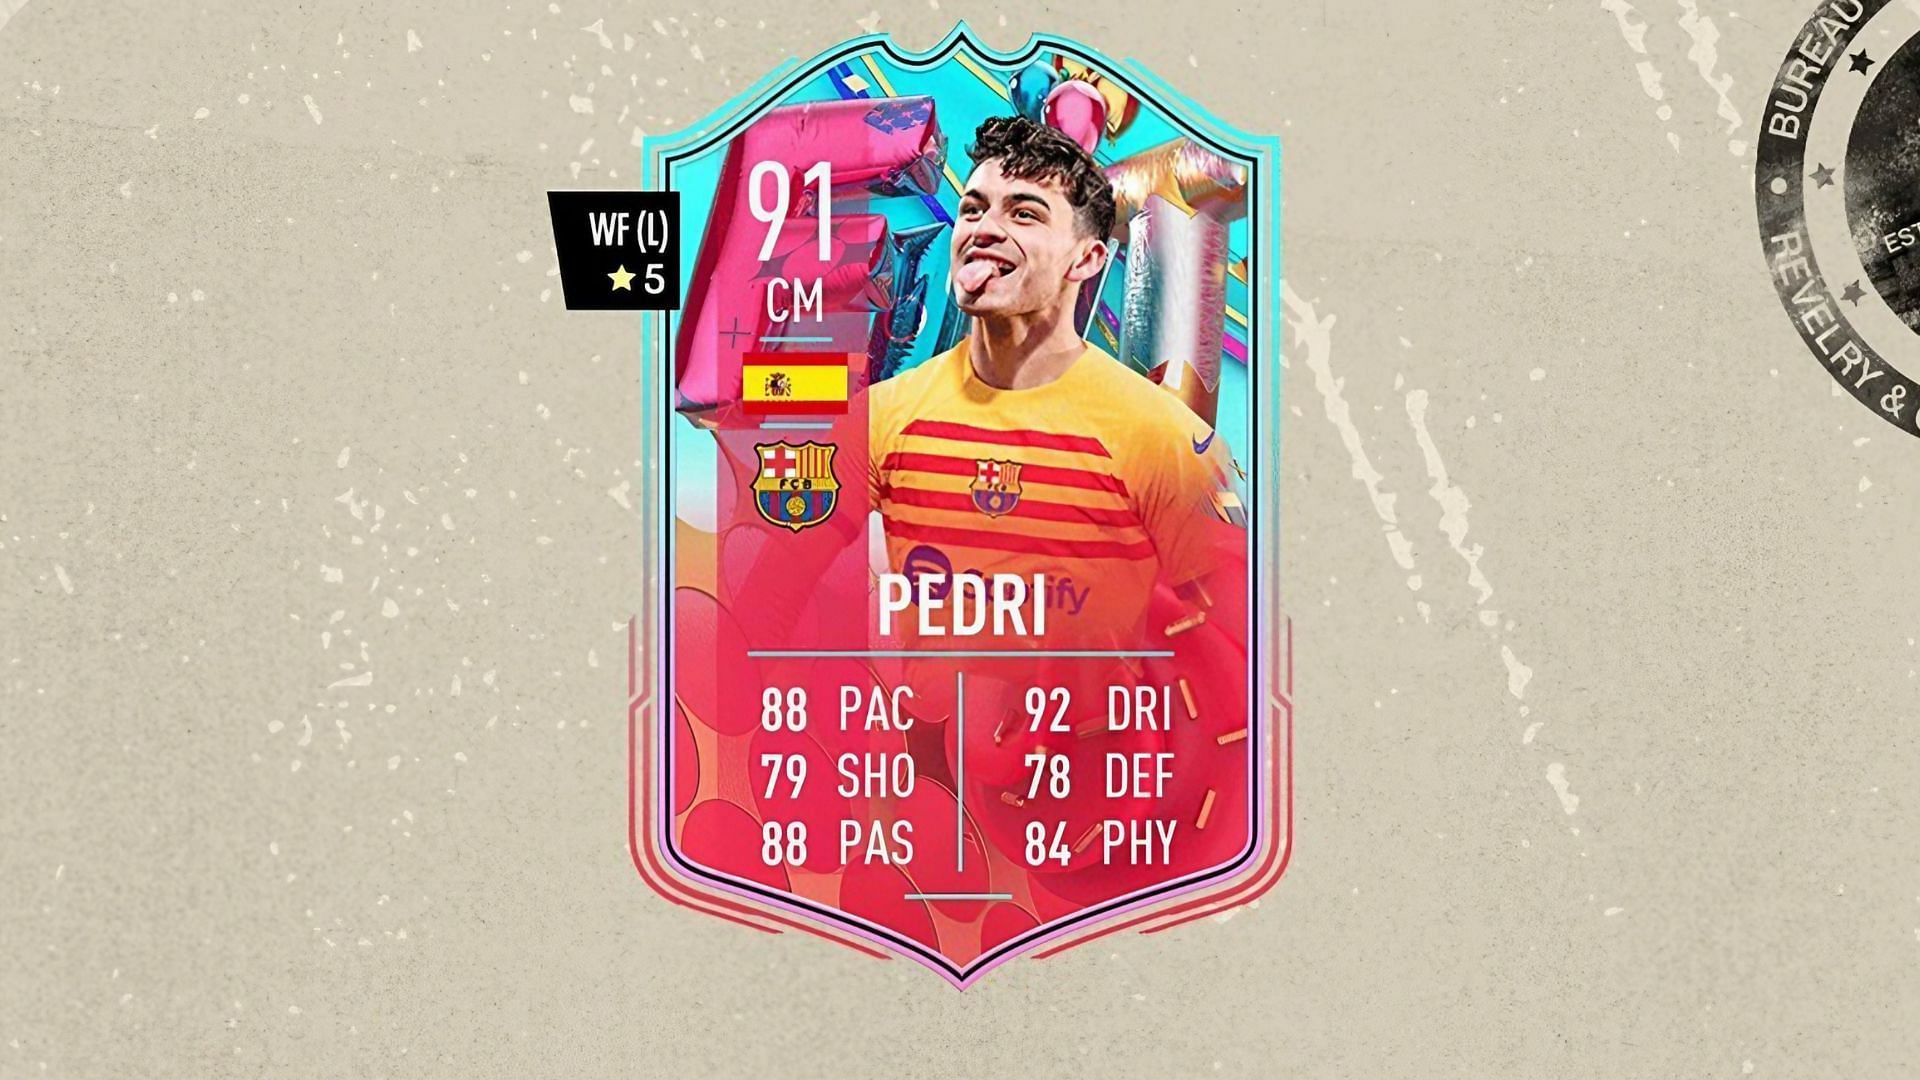 The Pedri FUT Birthday SBC is a really great opening for the promo in FIFA 23 (Image via EA Sports)